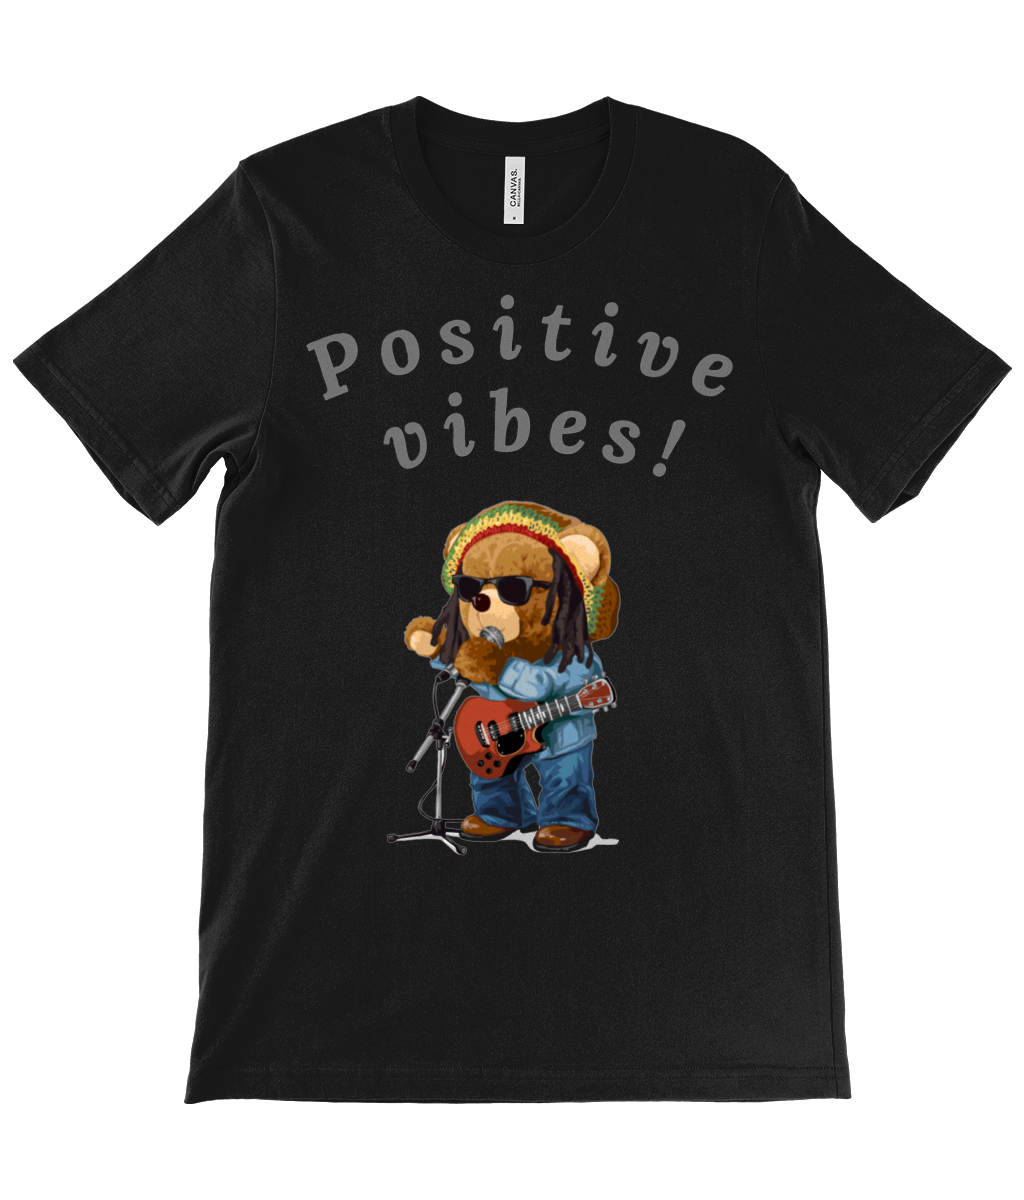 Adult's Unisex Positive Vibes Rasta Bear Cotton T-Shirt - Various Colours Available - FAST UK DELIVERY